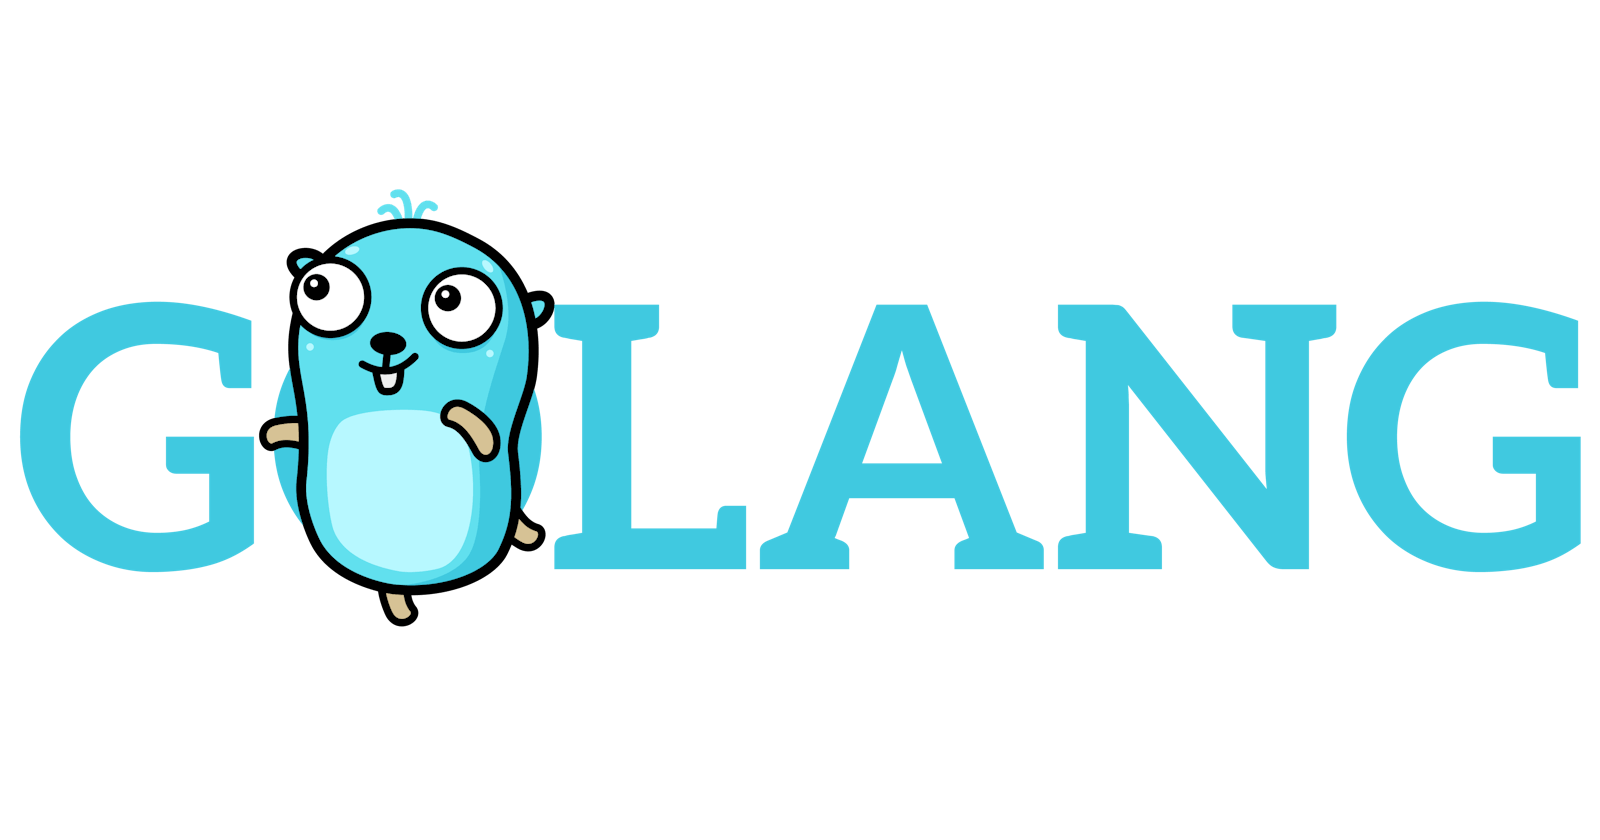 Converting a Struct to a Map in Golang